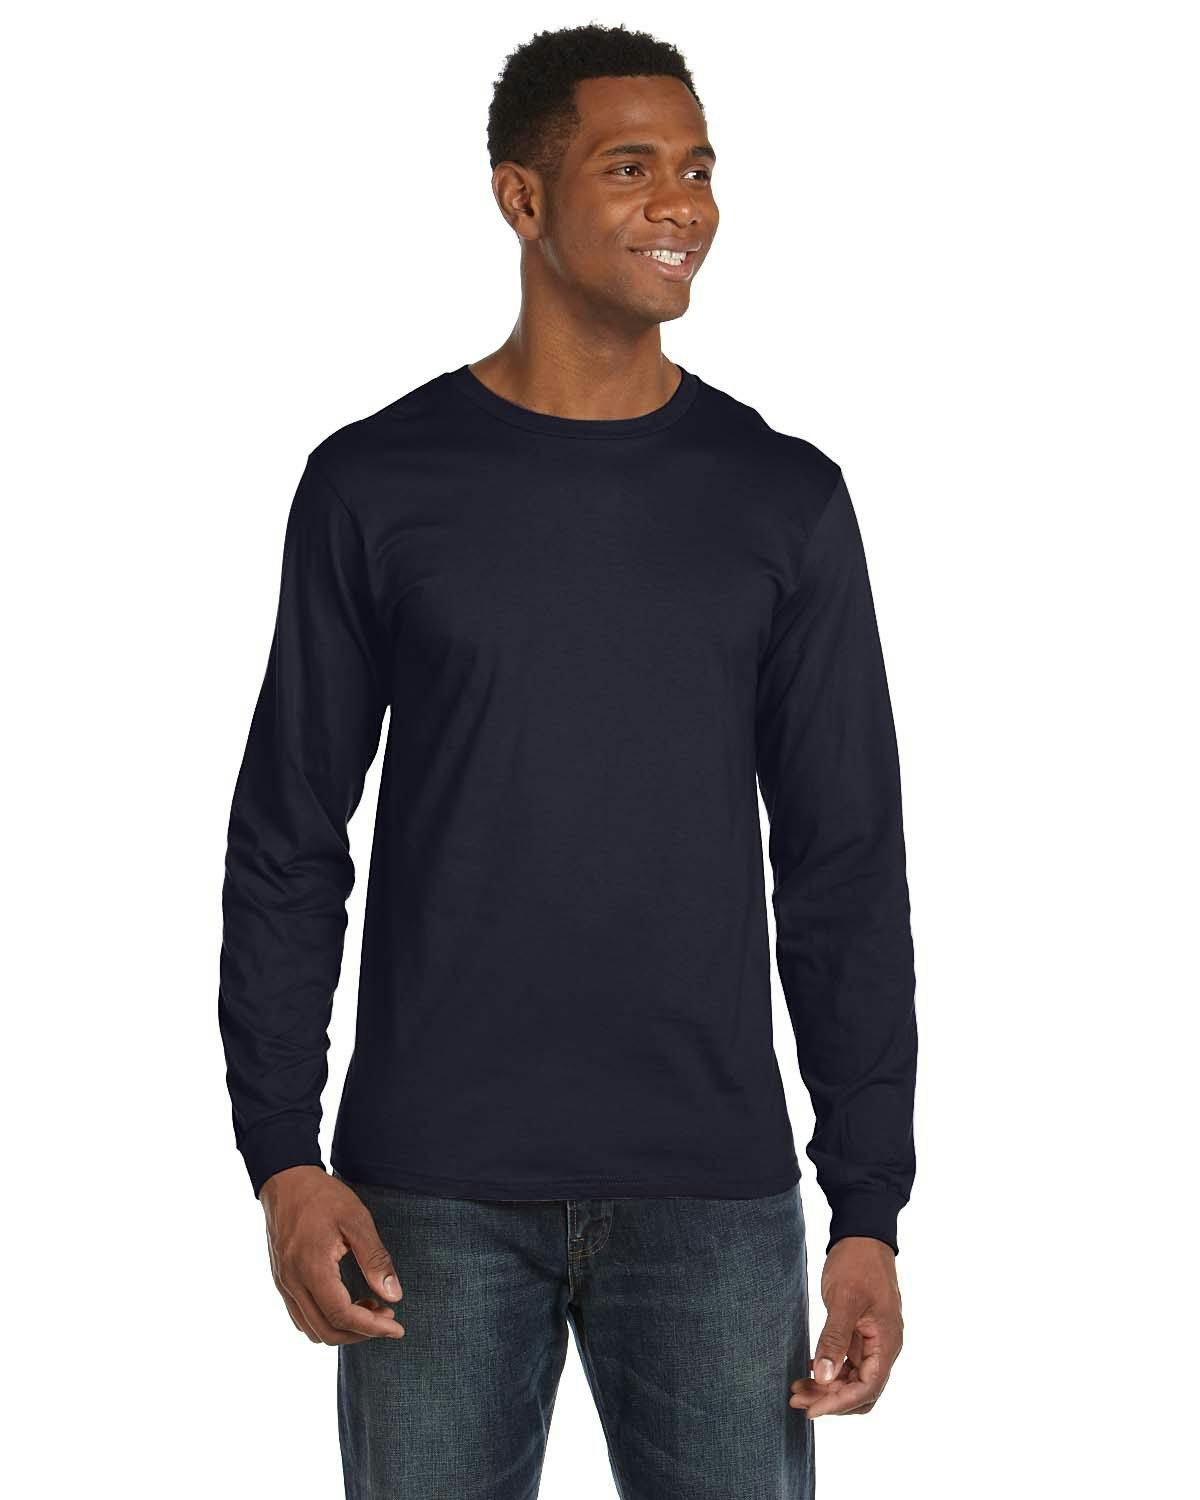 Image for Adult Lightweight Long-Sleeve T-Shirt